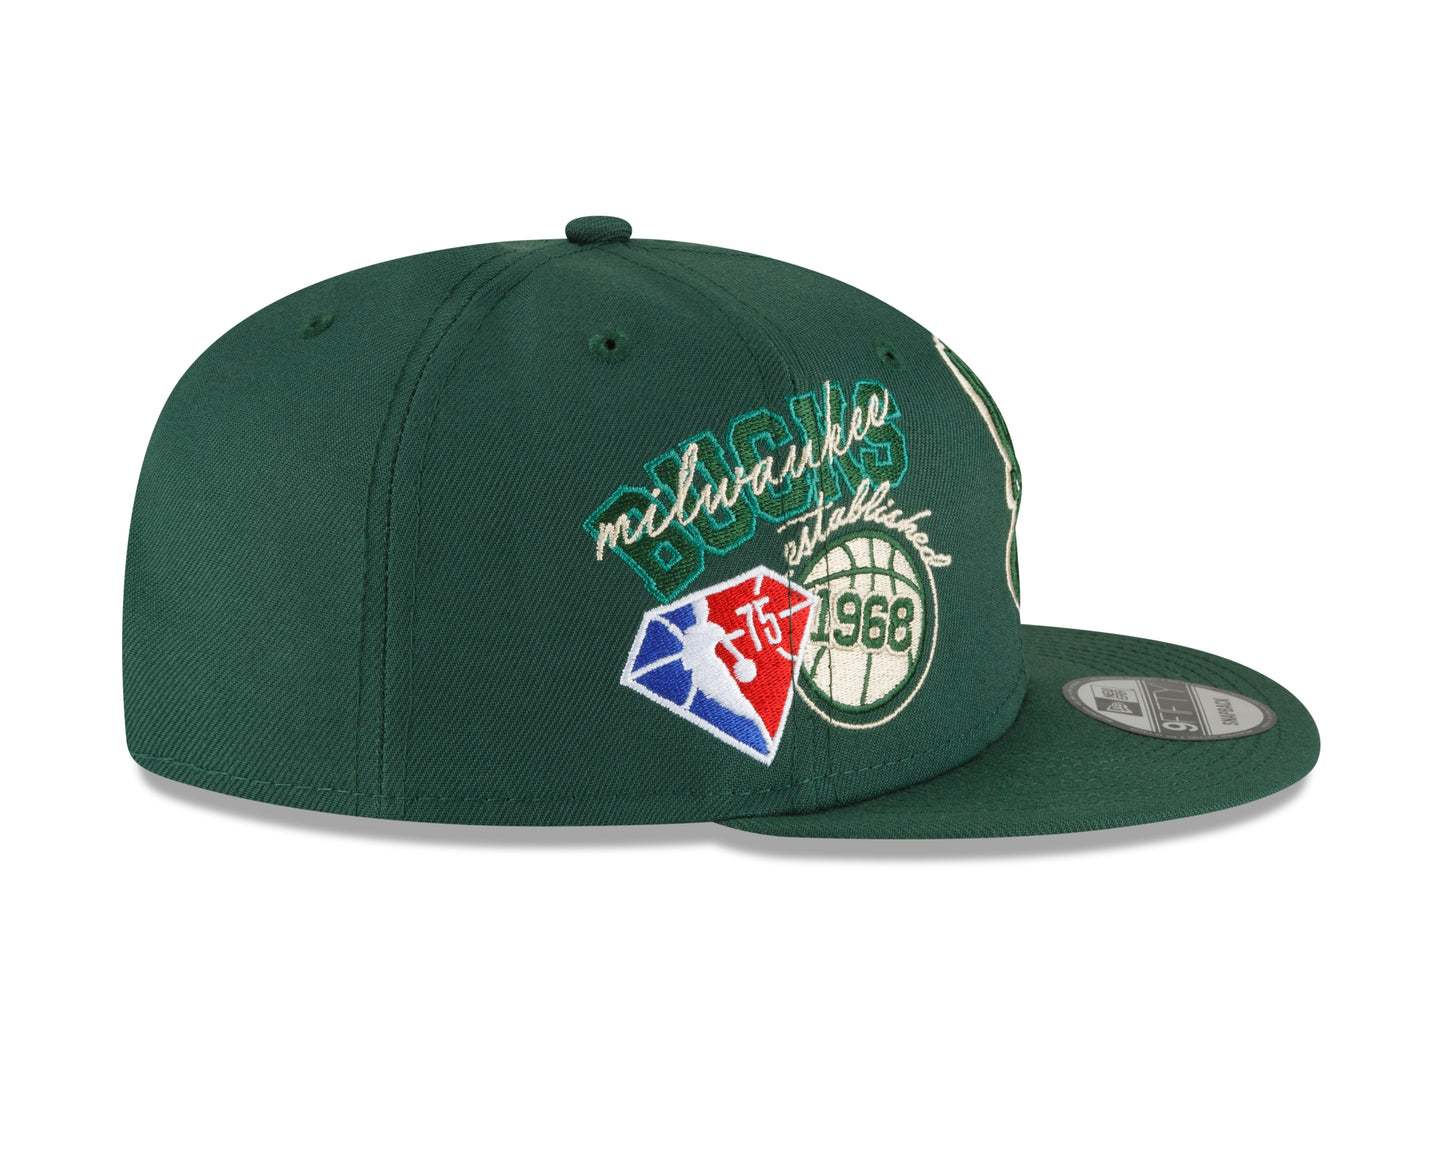 Milwaukee Bucks Authentic Back Half Series 9FIFTY Snap Back Hat - Green